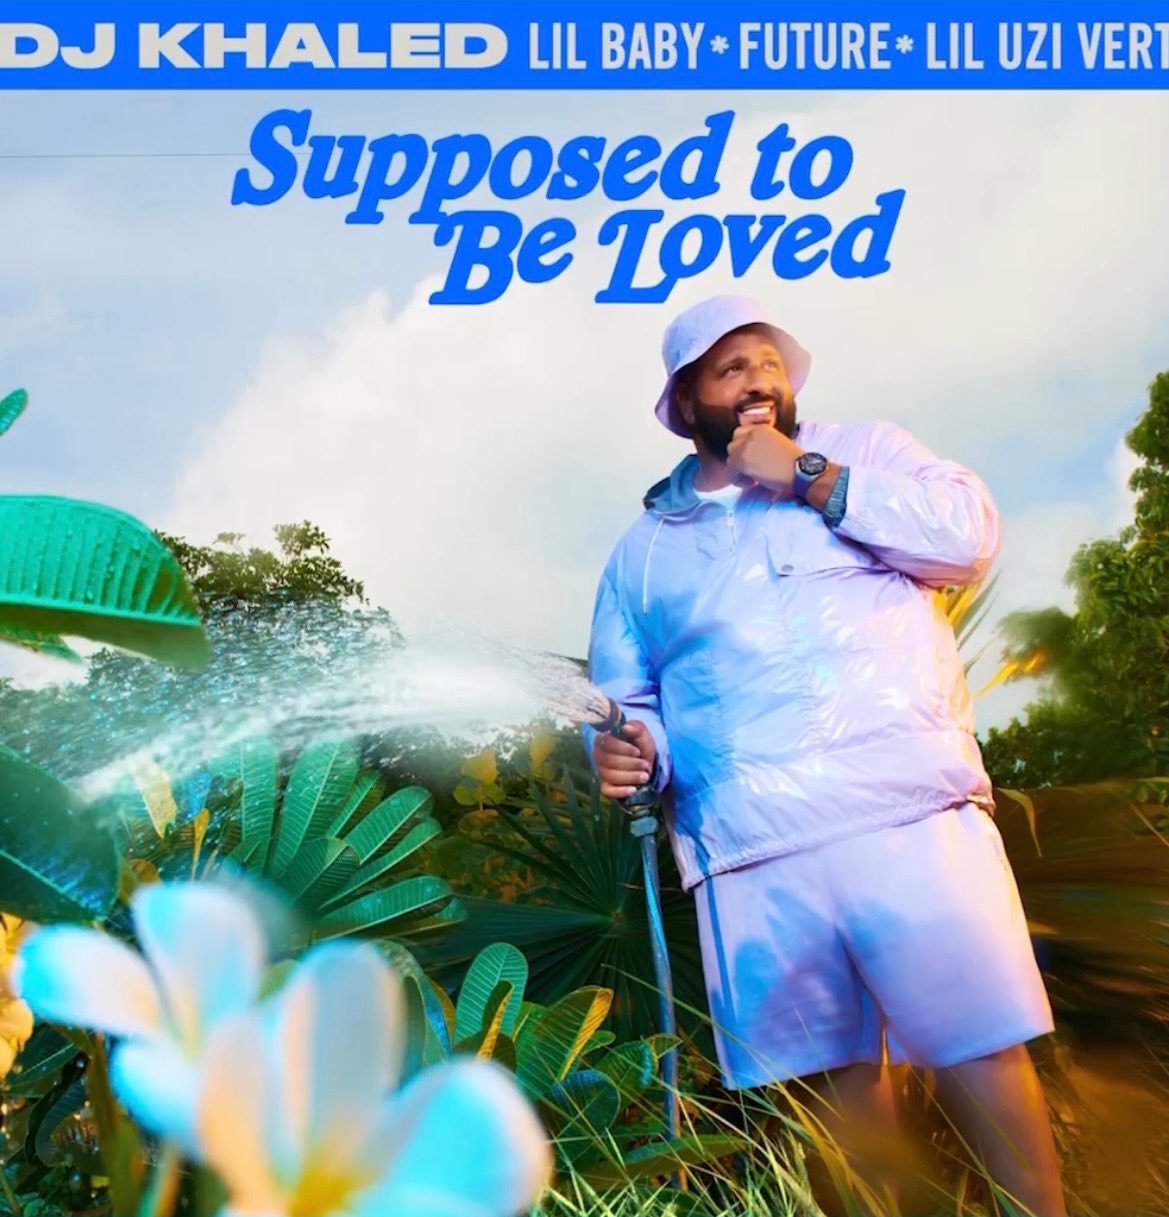 Dj Khaled, Supposed To Be Loved (Feat. Future, Lil Baby & Lil Uzi Vert) Download MP3 Leak